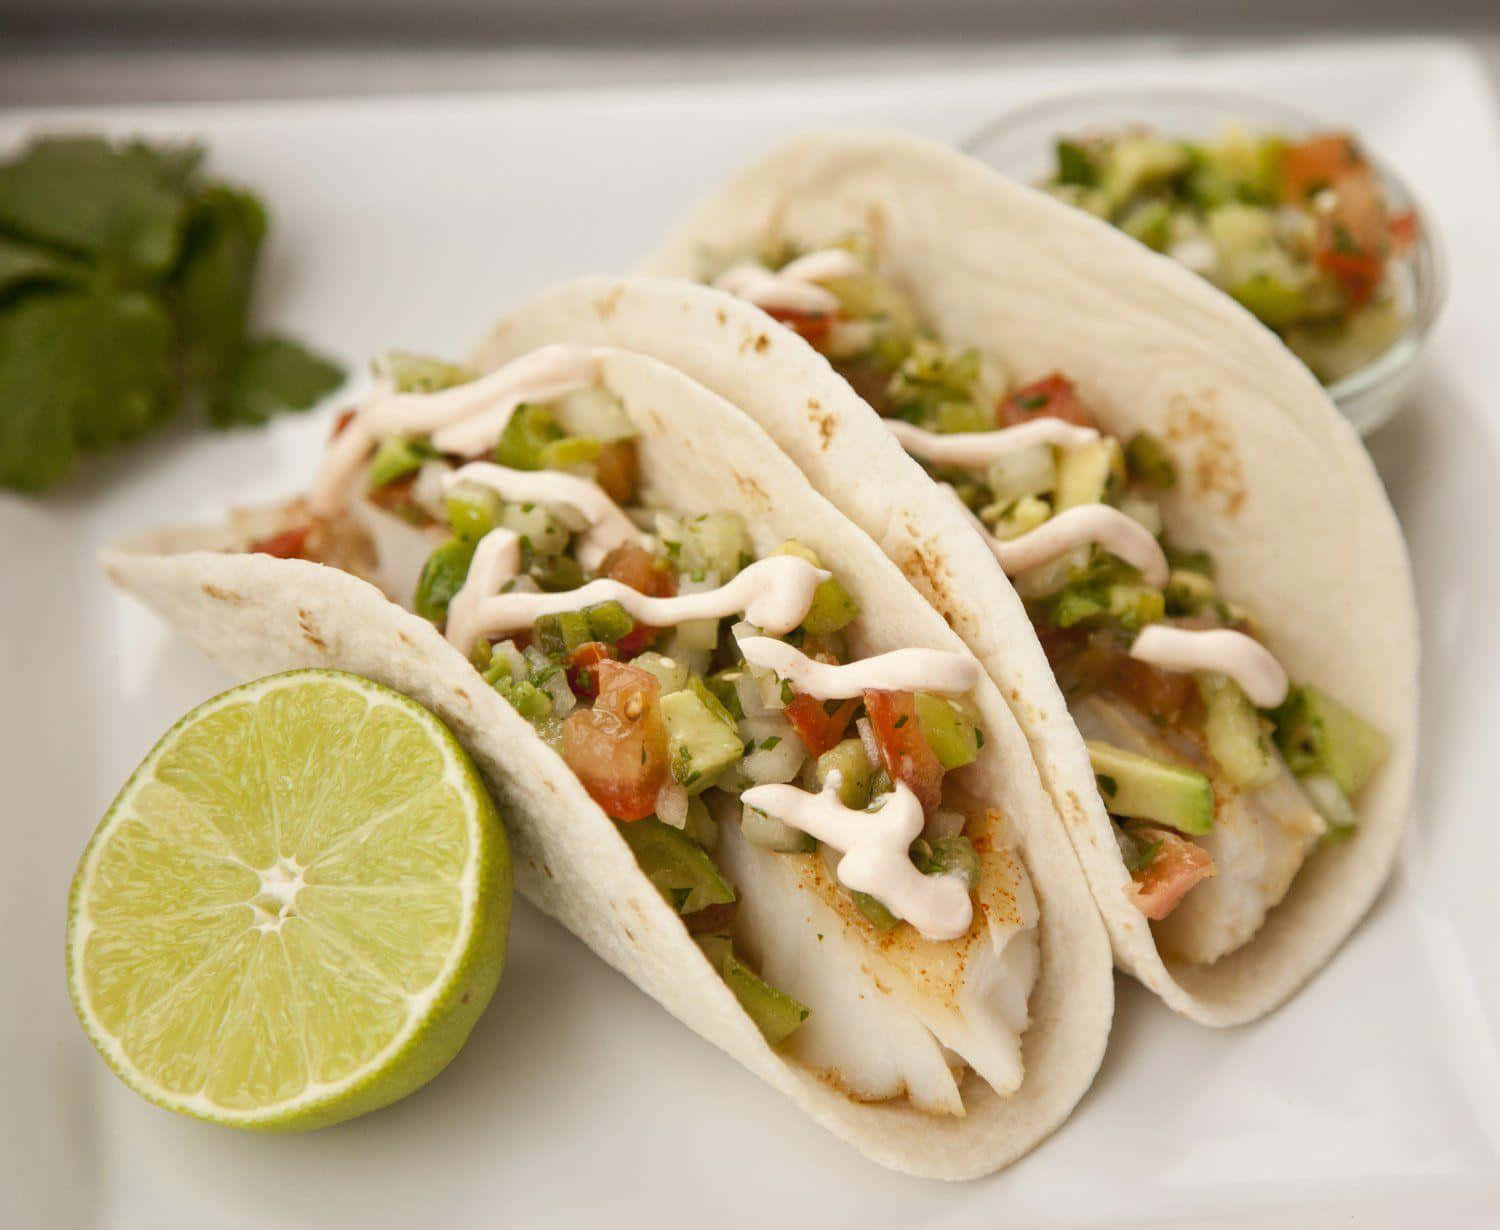 Delicious and bursting with flavor, Taco for lunch!